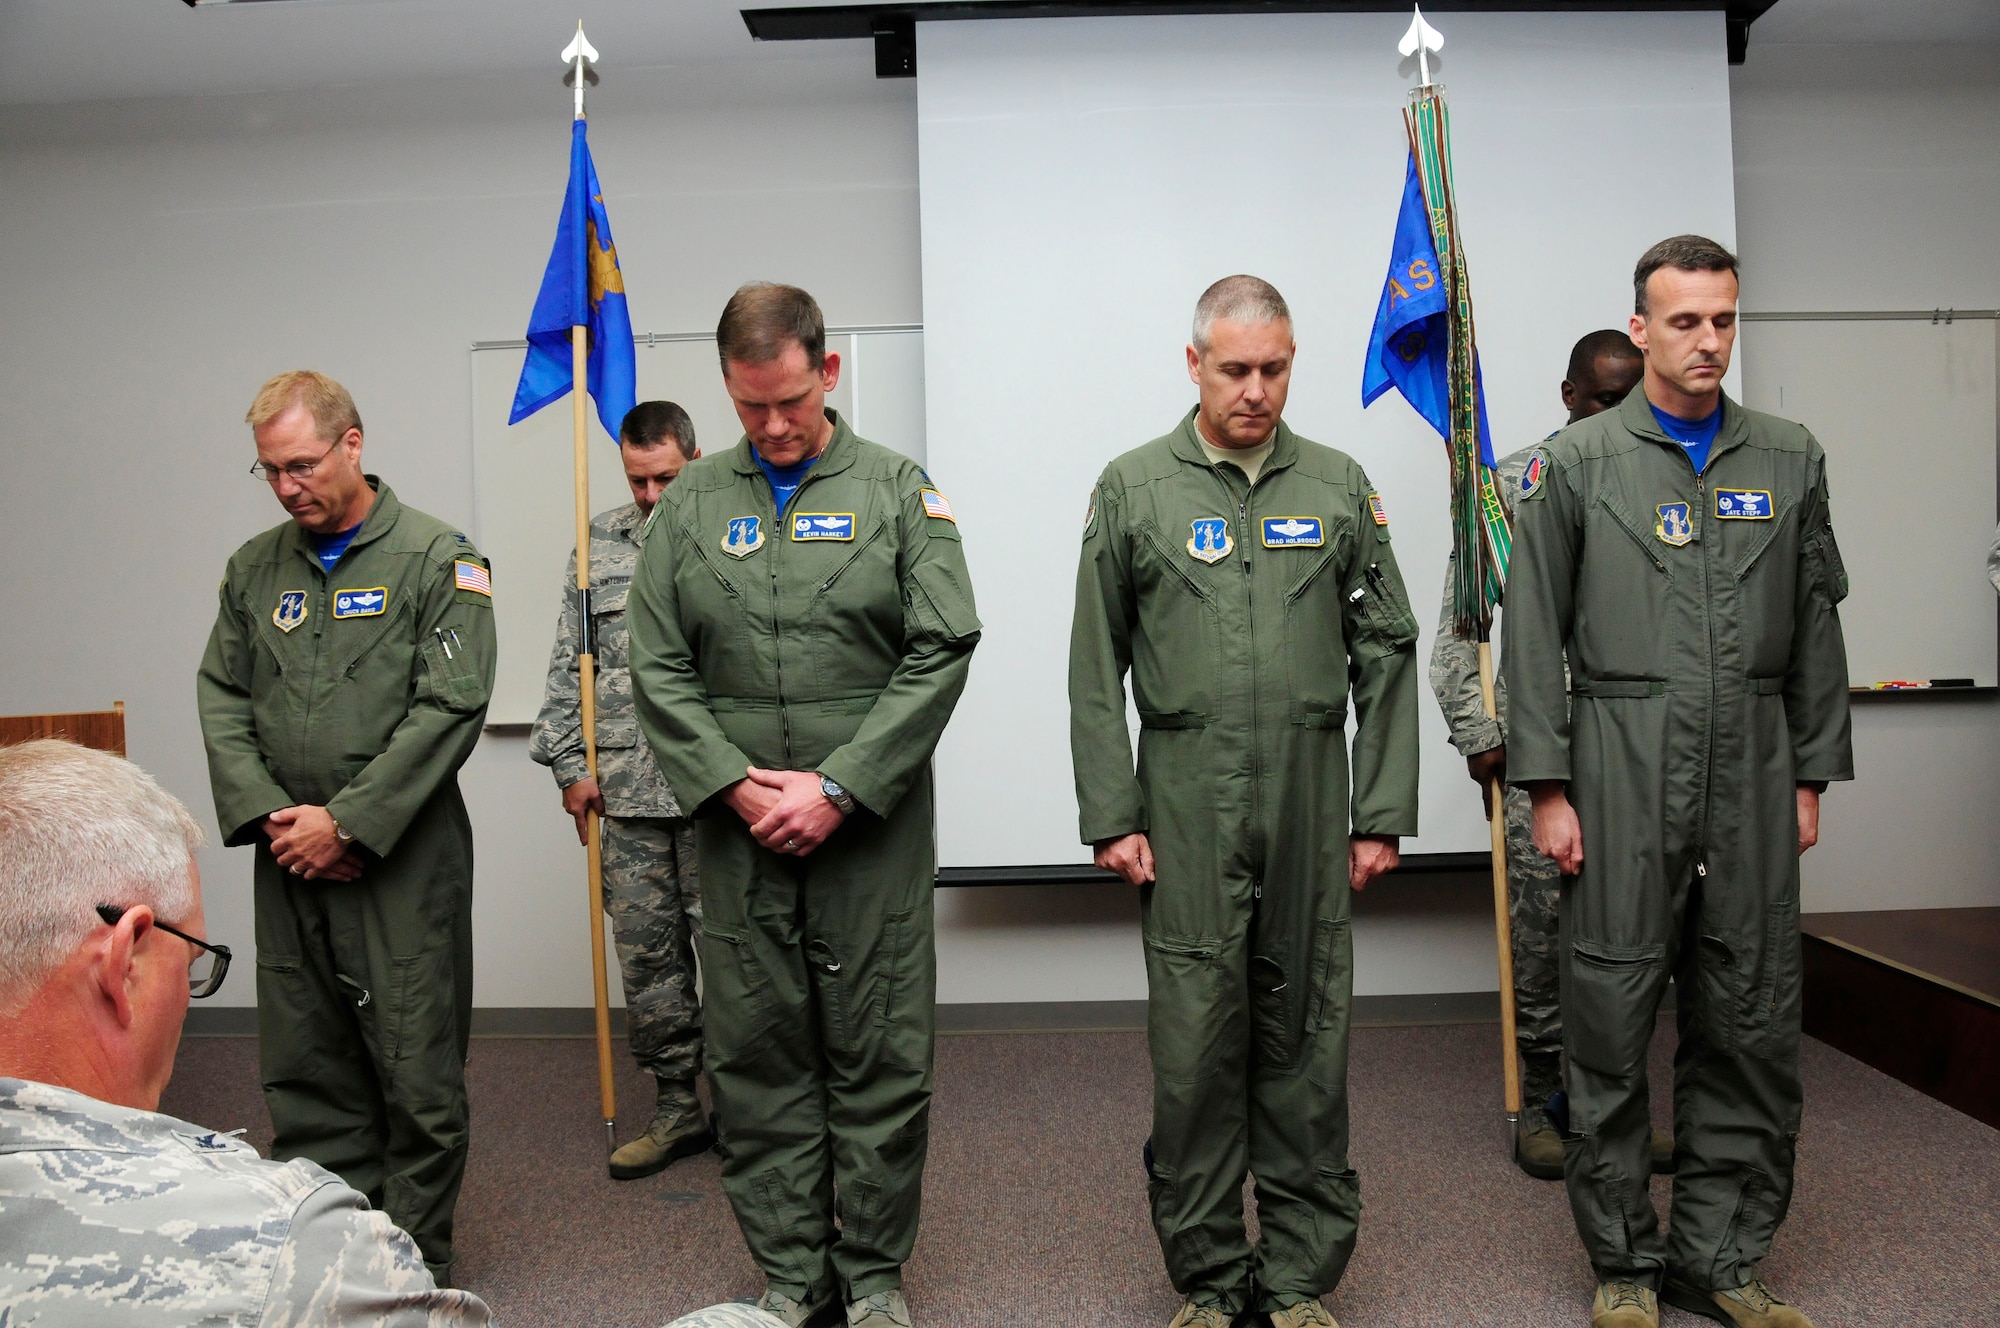 Leaders of the 145th Operations Group, bow their heads in prayer before a change of command ceremony  held at the North Carolina Air National Guard Base, Charlotte Douglas International Airport; June 6, 2015. (U.S. Air National Guard photo by Master Sgt. Patricia F. Moran, 145th Public Affairs/Released)